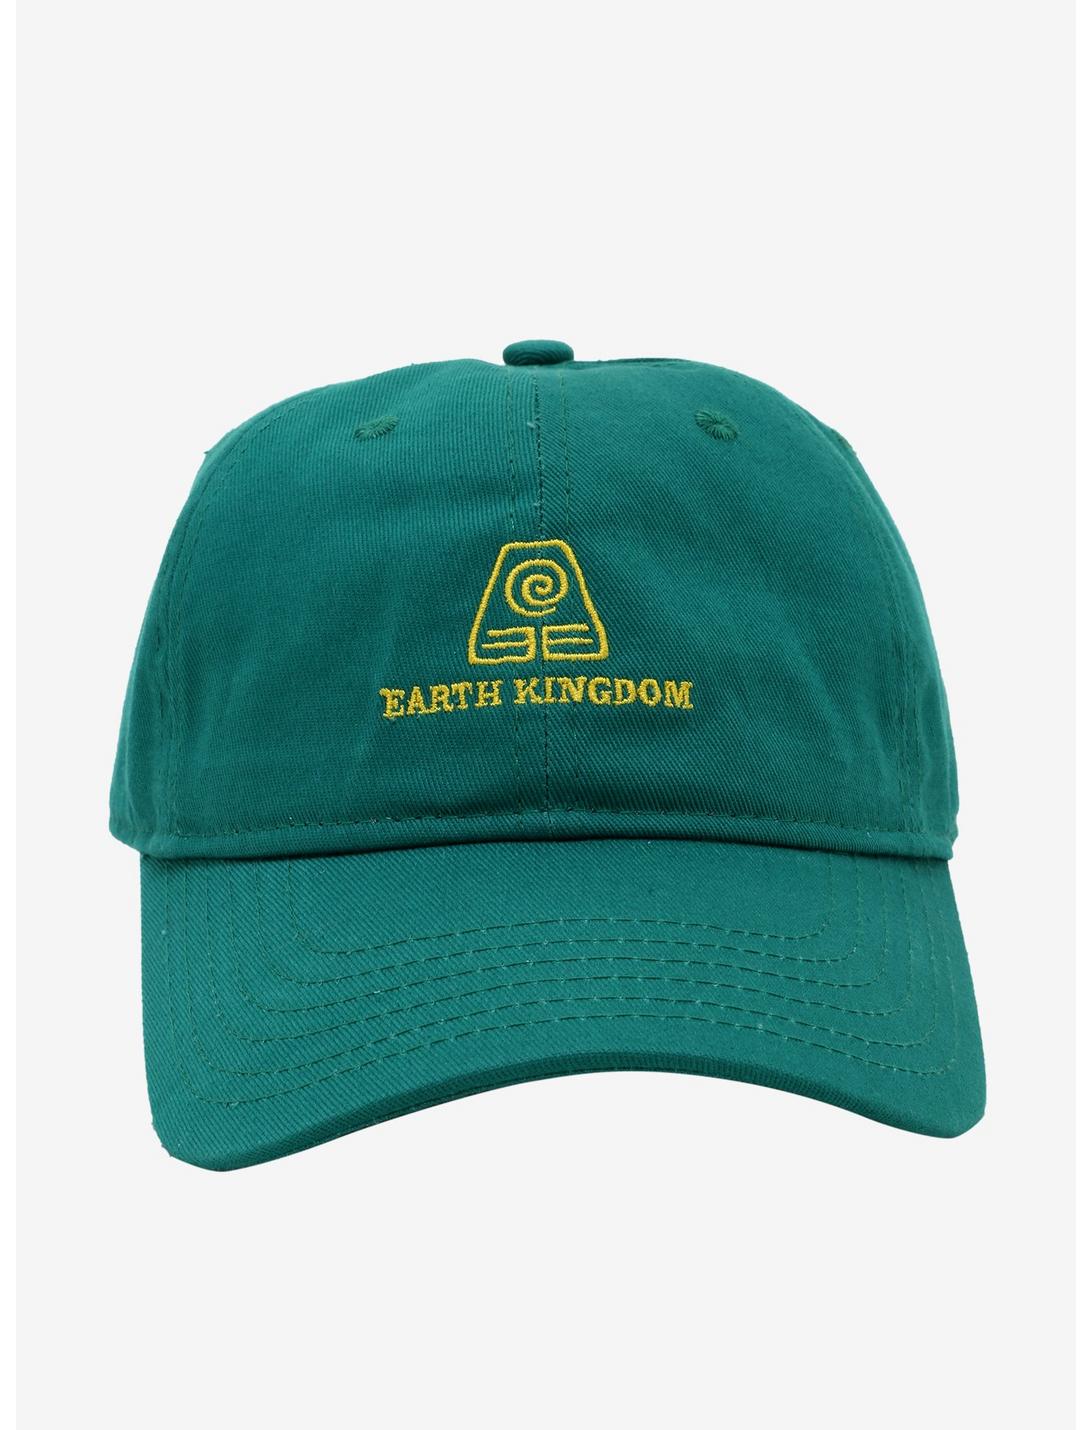 Avatar: The Last Airbender Earth Kingdom Cap - BoxLunch Exclusive, , hi-res